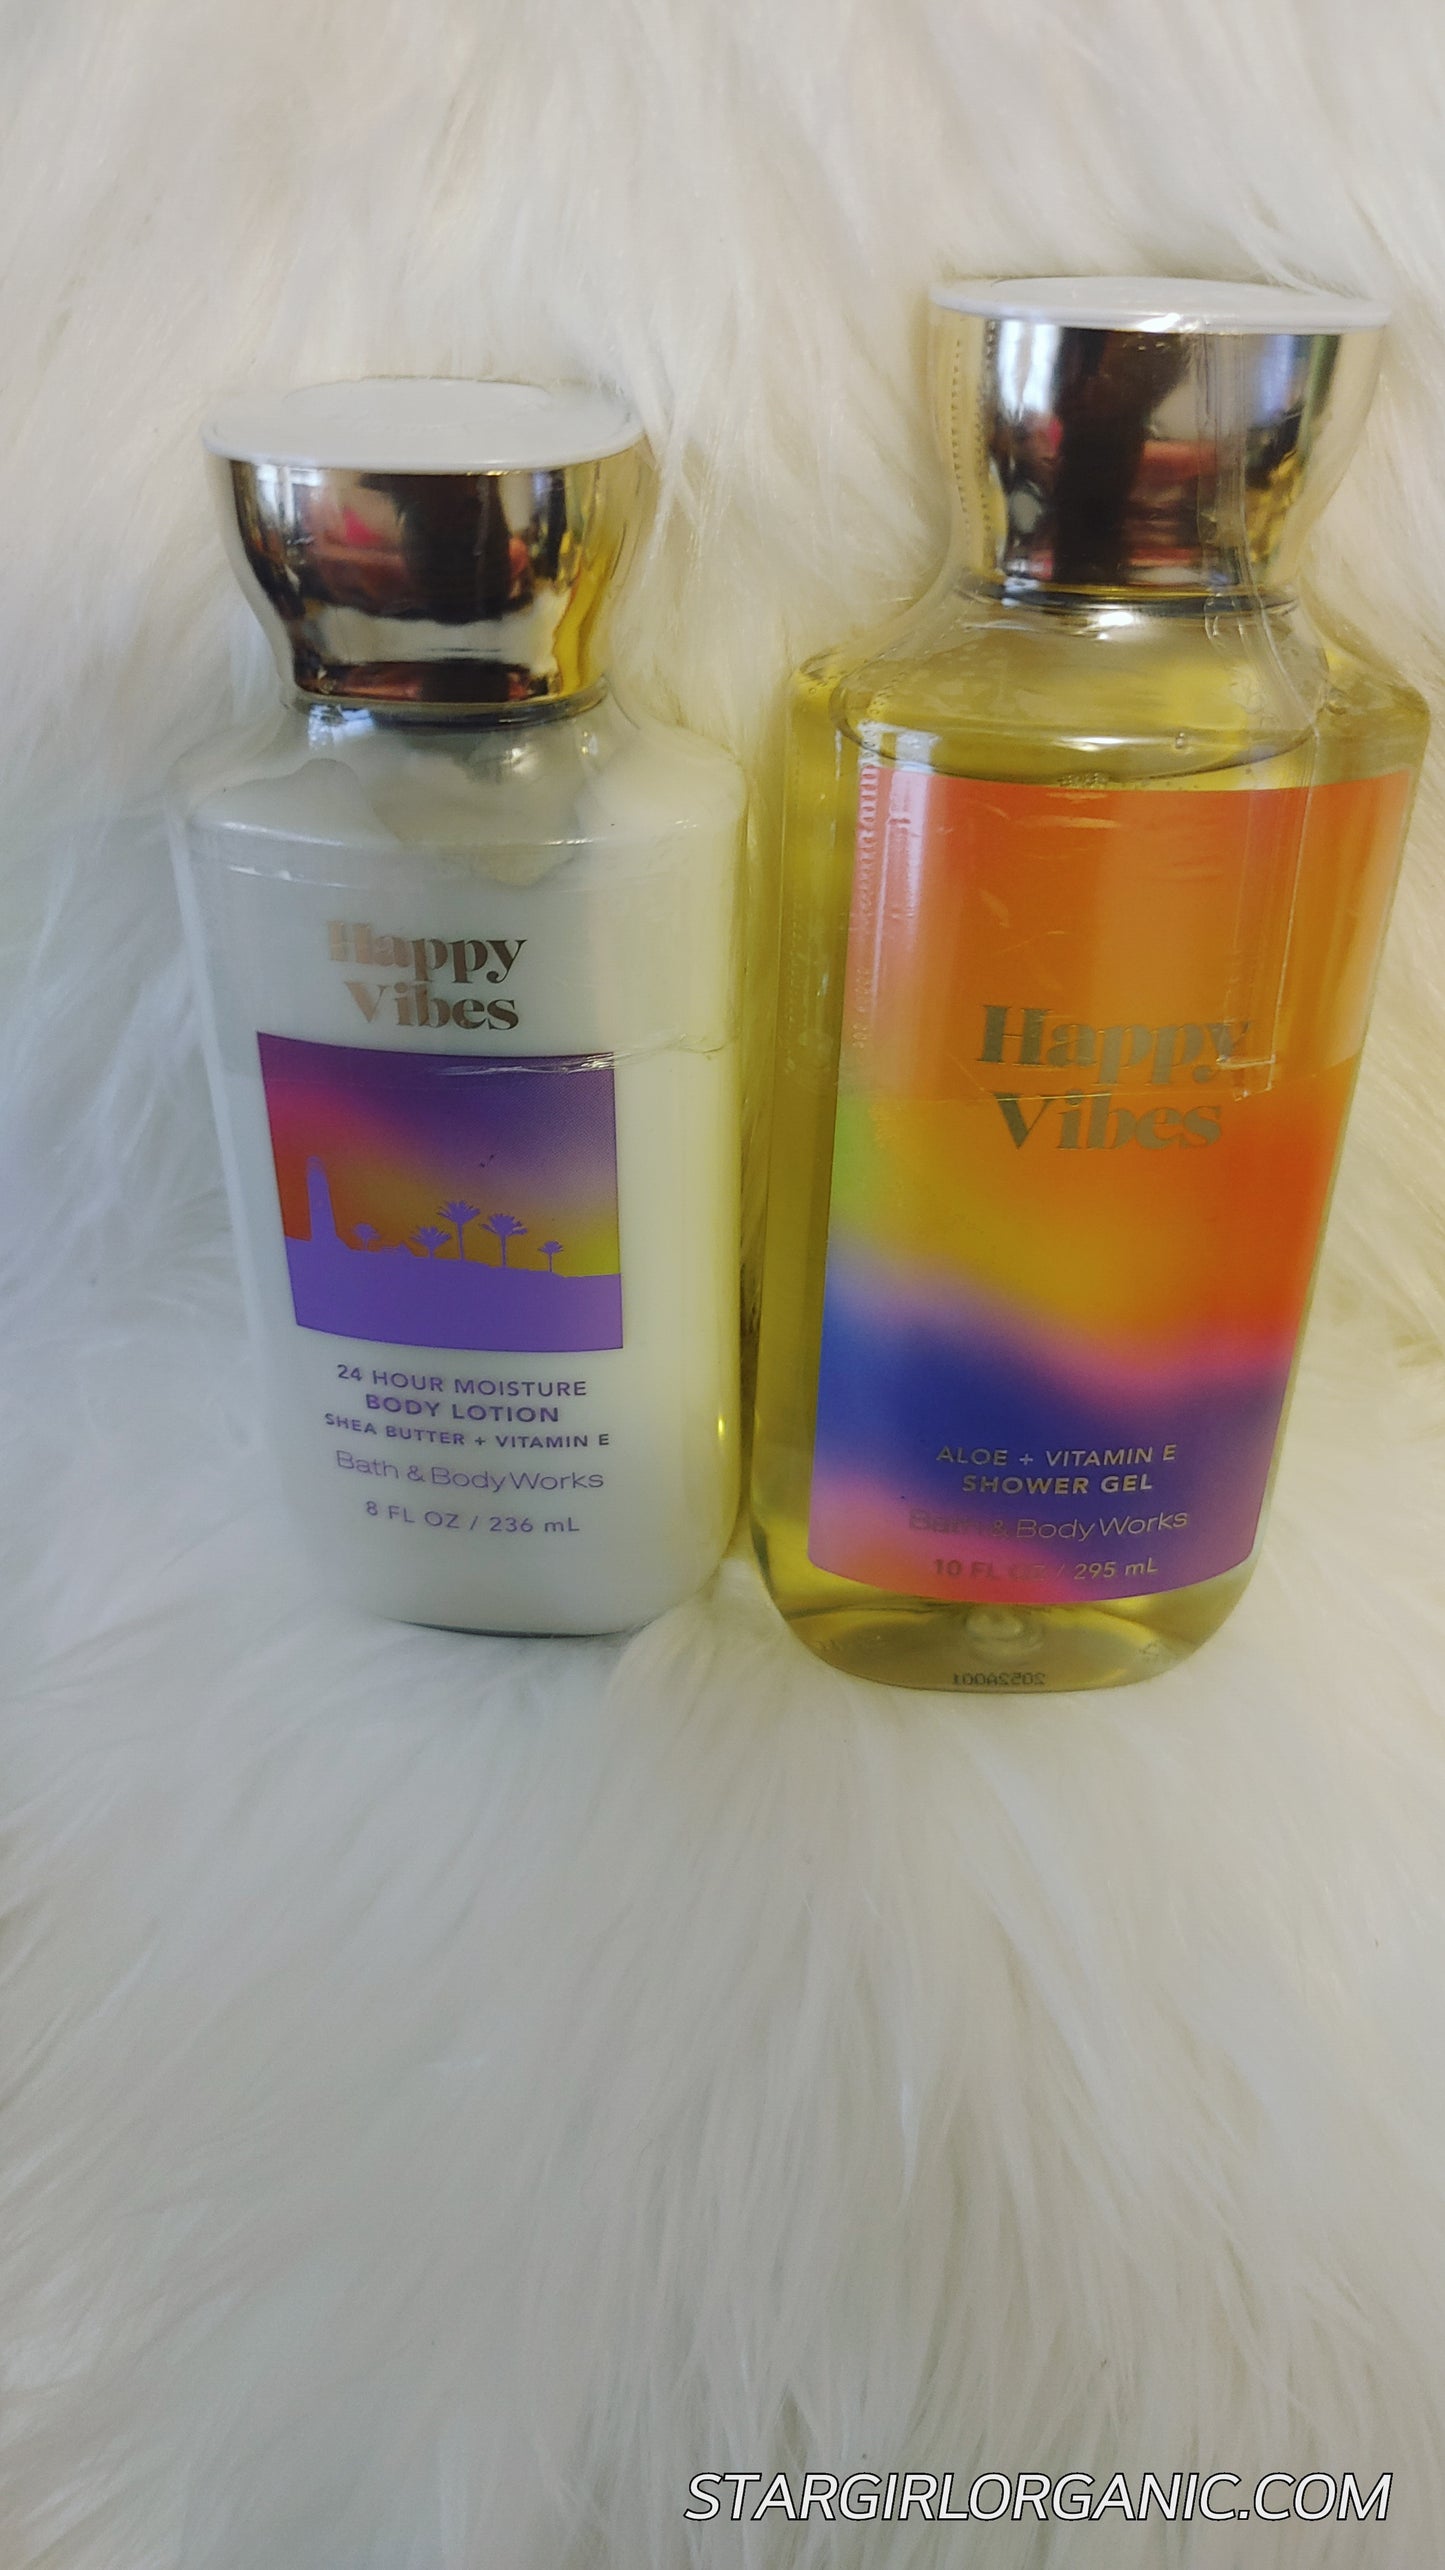 Bath & Body Works. 2PC Sets Happy Vibes Body Lotion and Shower Gel